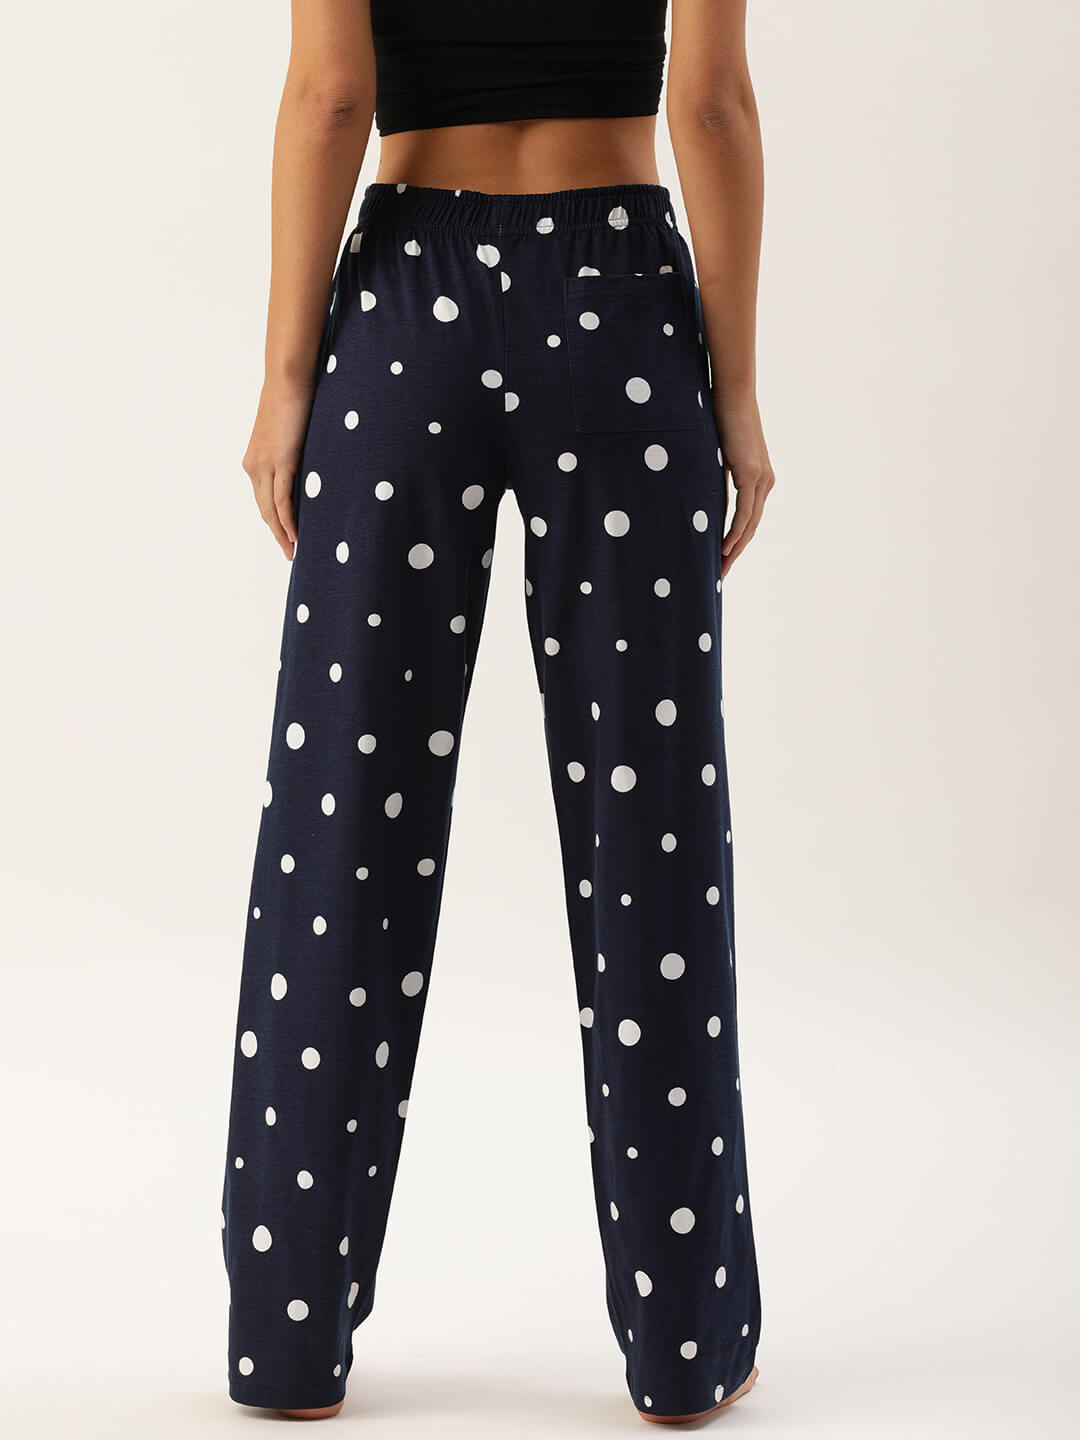 Pack of 2 Lounge Pants - AOP Navy + Solid Red